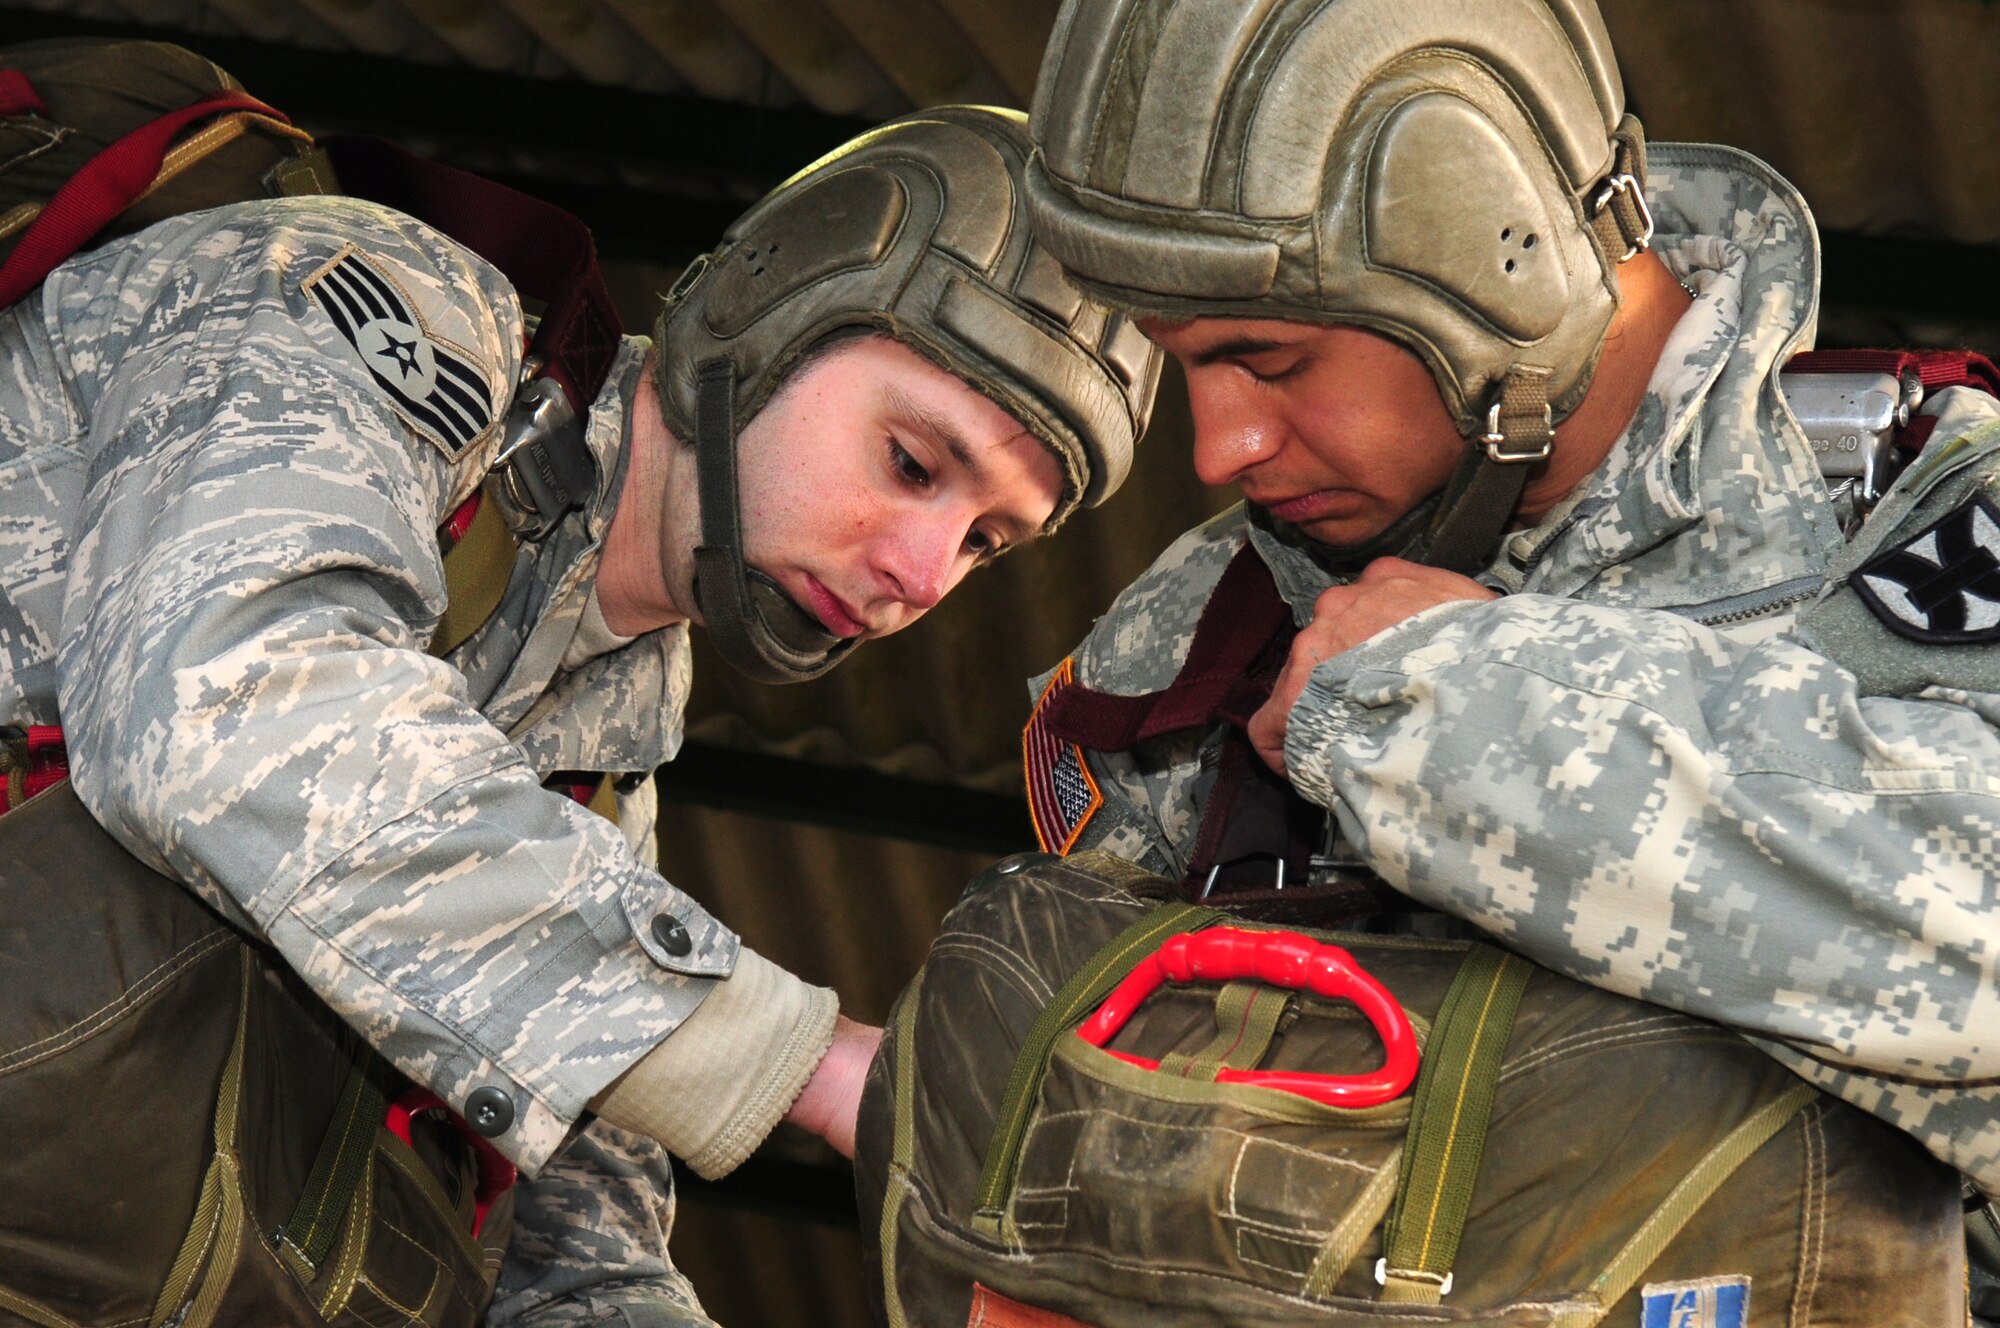 U.S. Air Force Staff Sgt. Derrick Drennan assists U.S. Army Specialist Eric Meneses in proper ware of the French parachute during training before a combined nation jump, March 3, 2010.   Members of the 435th Contingency Response Group and the 5th Quartermaster Company joined with their French military counterparts for a week of training at the École des troupes aéroportées (ETAP), or School of Airborne Troops, a military school dedicated to training the military paratroopers   of the French army, located in the town of Pau, in the département of Pyrénées-Atlantiques, France.  The ETAP is responsible for training paratroopers, and for international cooperation and promotion of paratroop culture. (U.S. Air Force Photo by Staff Sgt. Jocelyn Rich) 